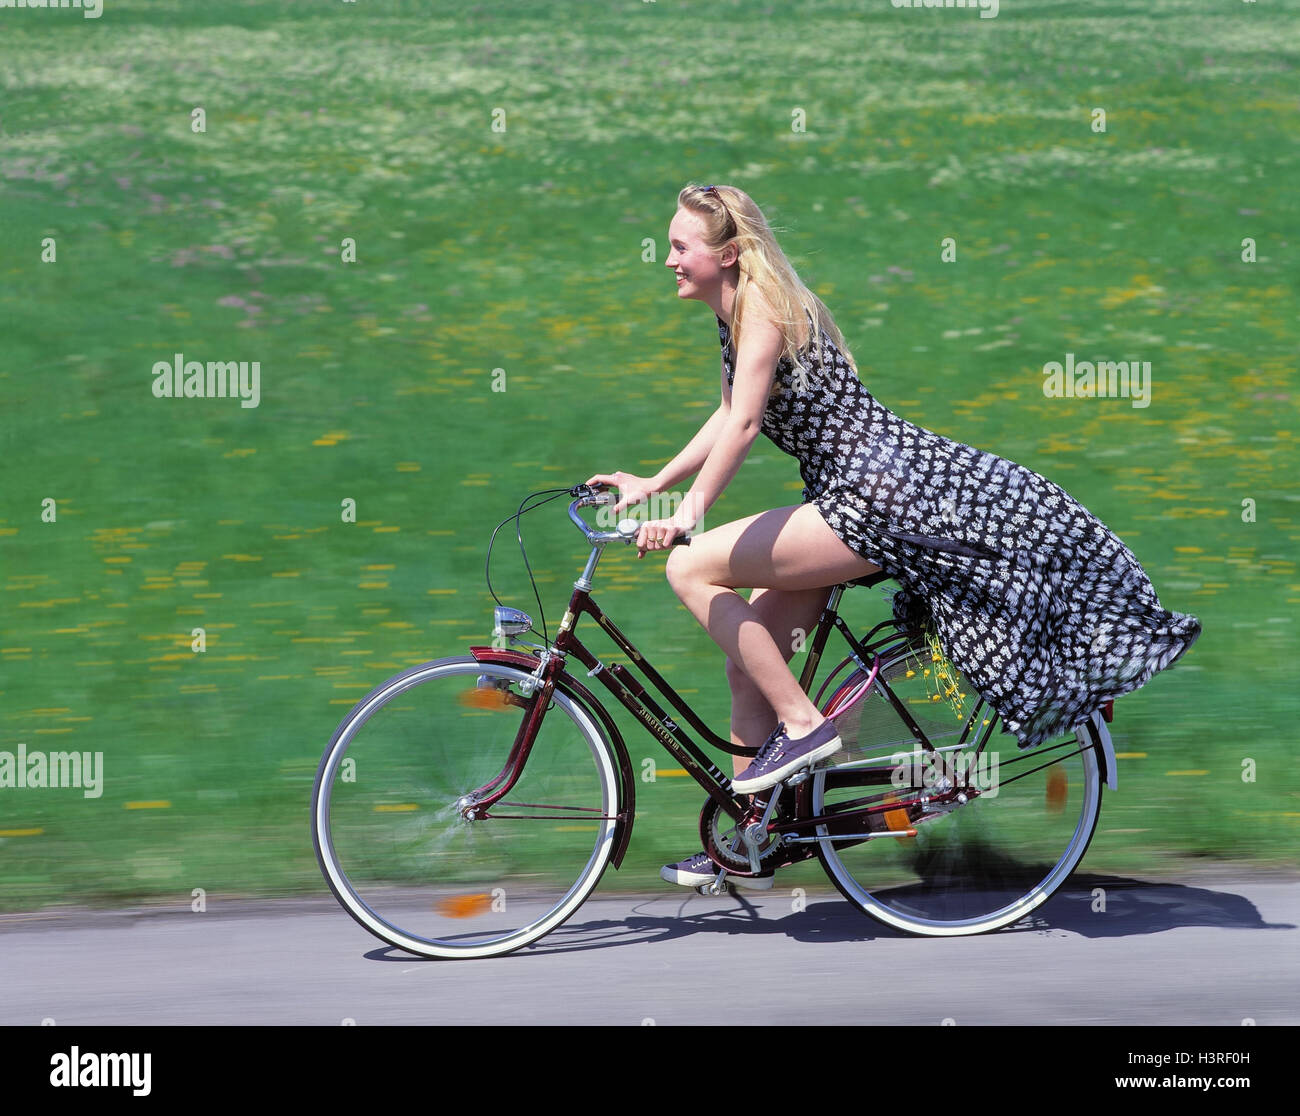 Country road, woman, young, summer dress, riding a bike, street, meadow, teenager, girl, dress, bicycle, go, cyclist, cyclist, leisure time sport, summer Stock Photo